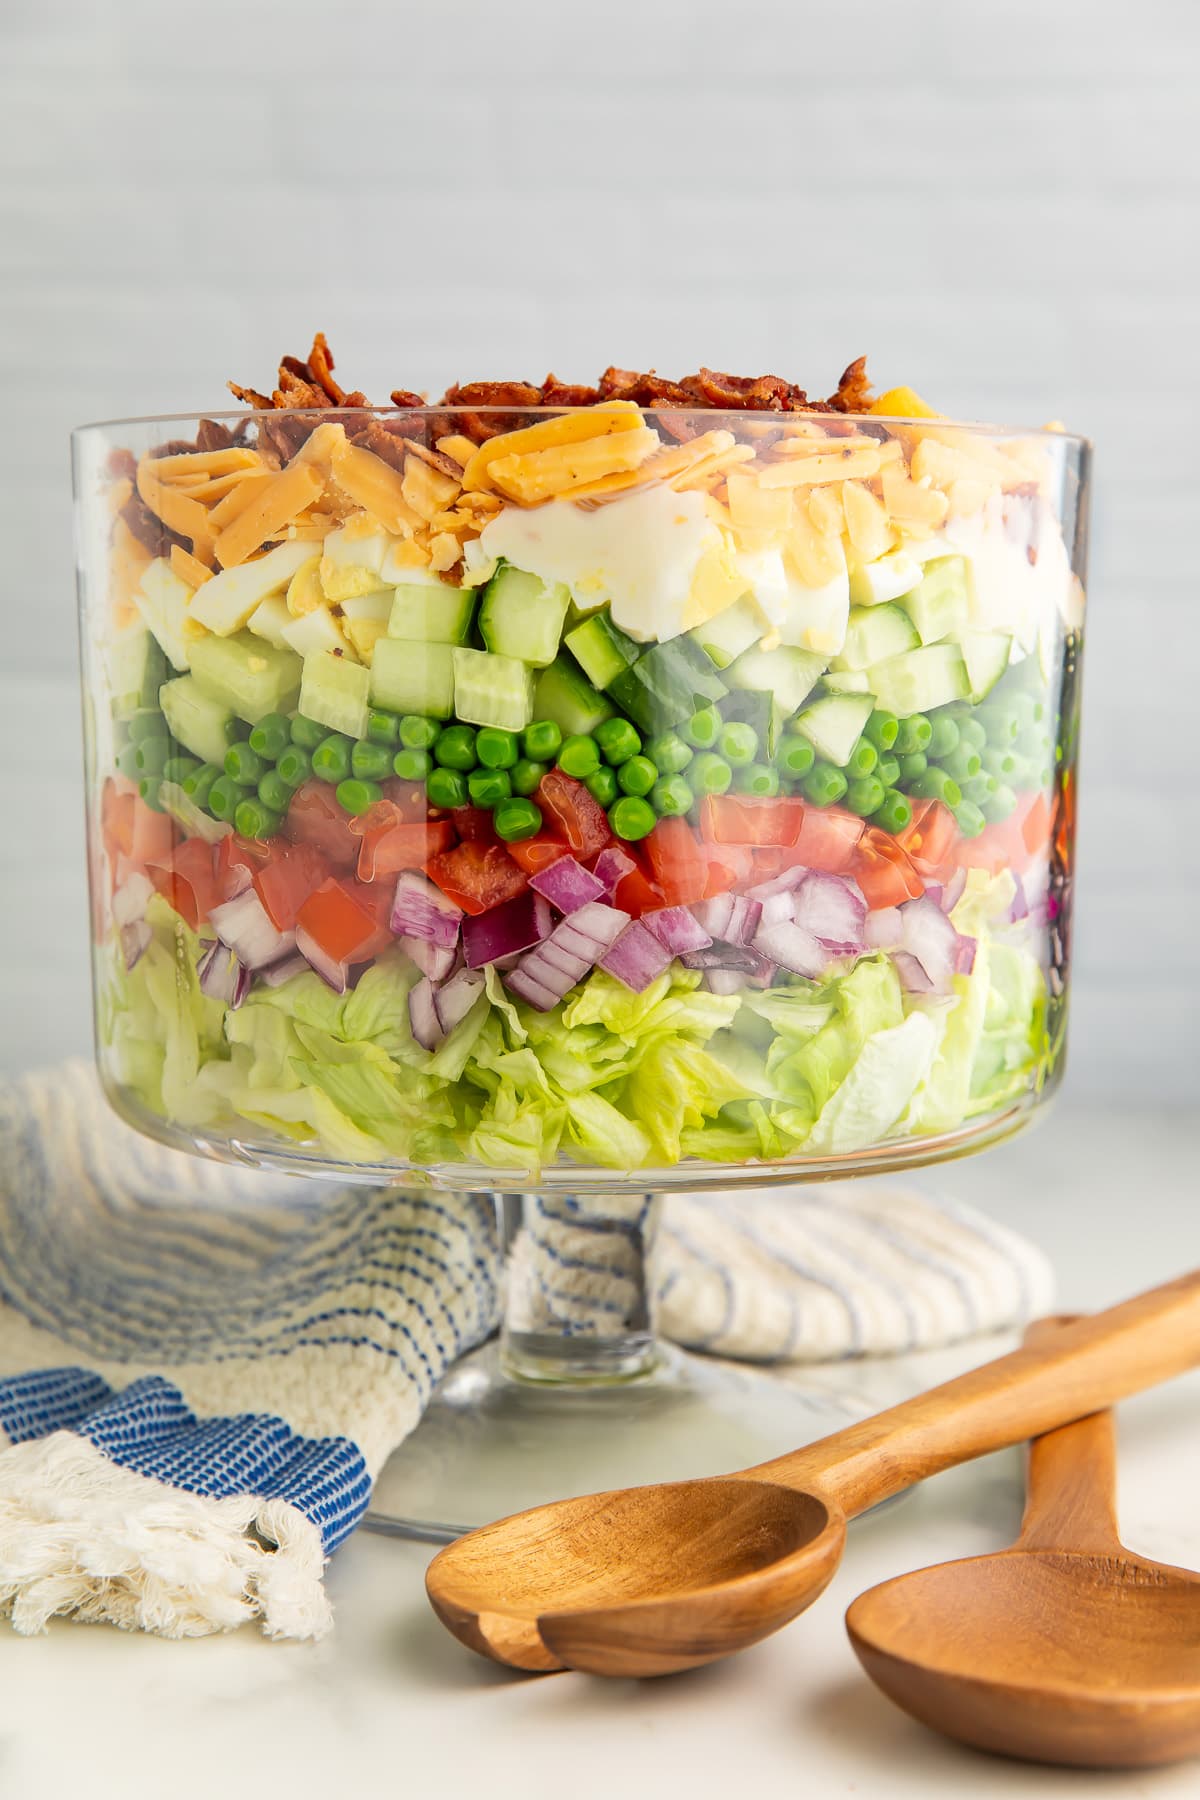 A 7 layer salad in a glass trifle dish with a pedestal base next to wooden utensils and a dish towel.